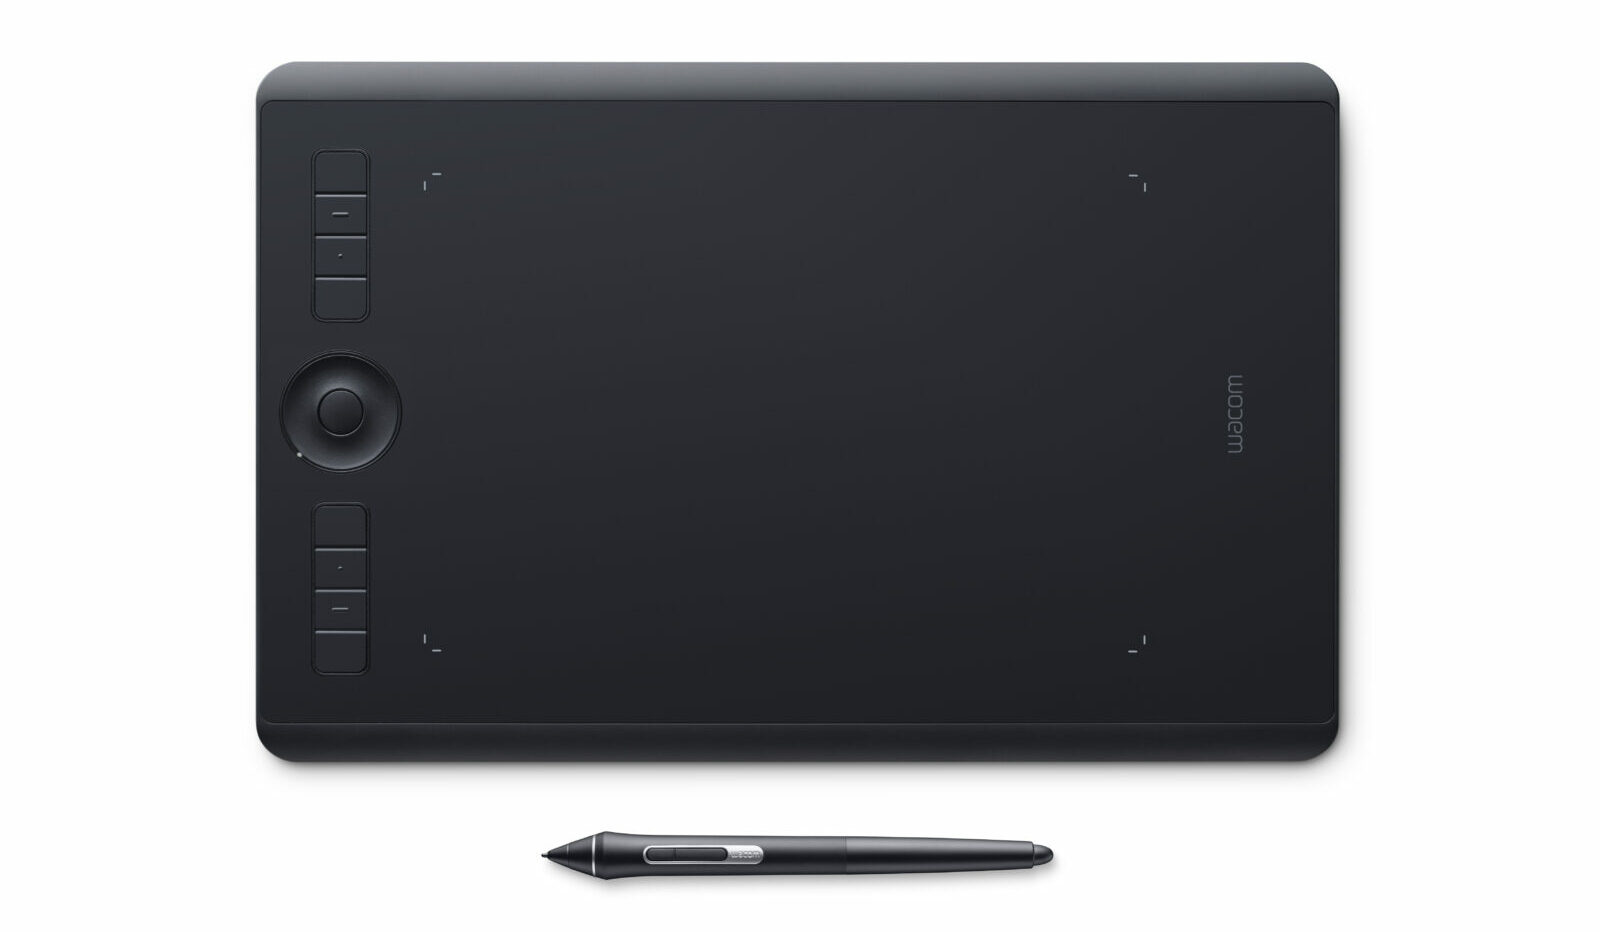 Wacom Intuos Pro tablet giveaway: The Intuos Pro is super-slim and lightweight.